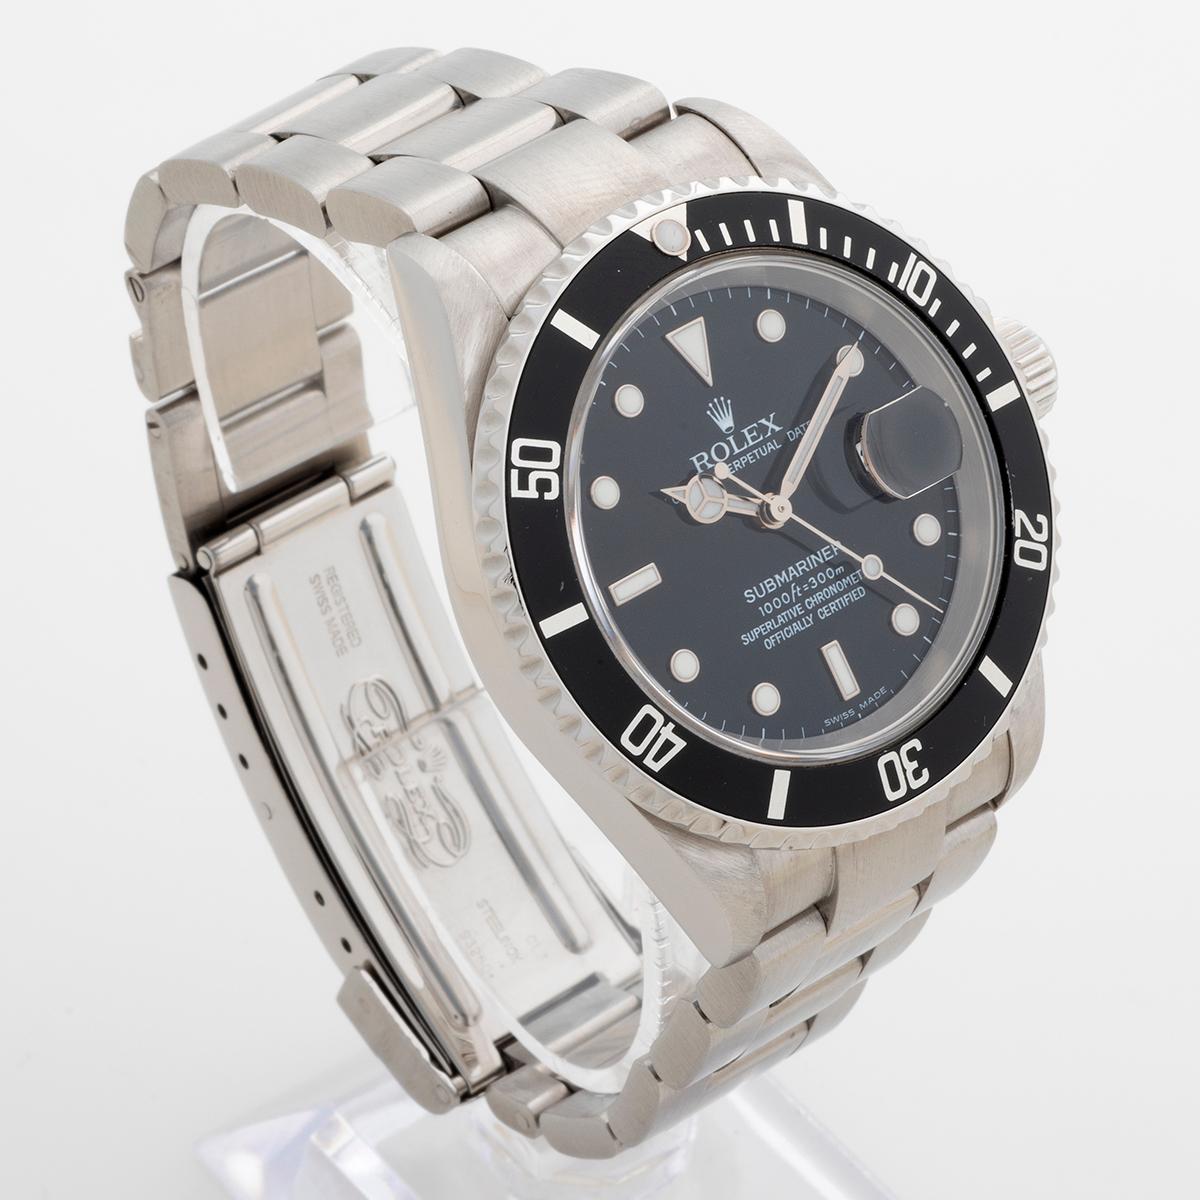 Our classic Rolex Submariner Date ref 16610 / 16610T features a stainless steel 40mm case ( no lug holes) and stainless steel bracelet with solid end links, and flip lock clasp. Presented in excellent condition with light signs of use overall, this